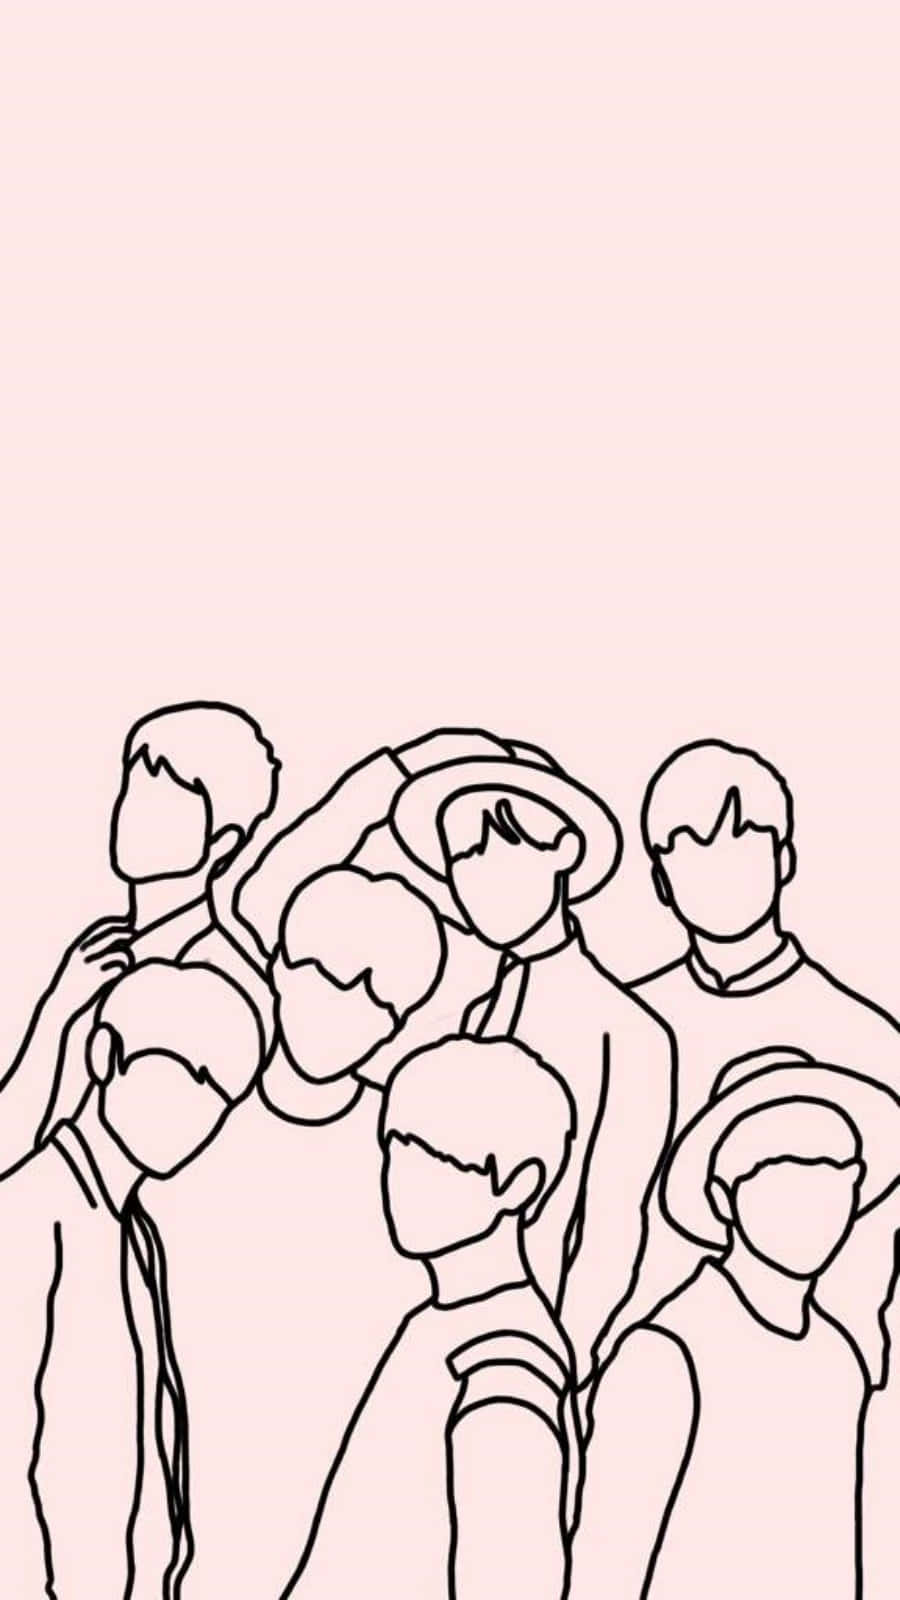 Group of People or Workers Taking Photo Together Vector Illustration Sketch  Doodle Hand Drawn with Black Lines Isolated on White Stock Vector   Illustration of businessman communication 154991713